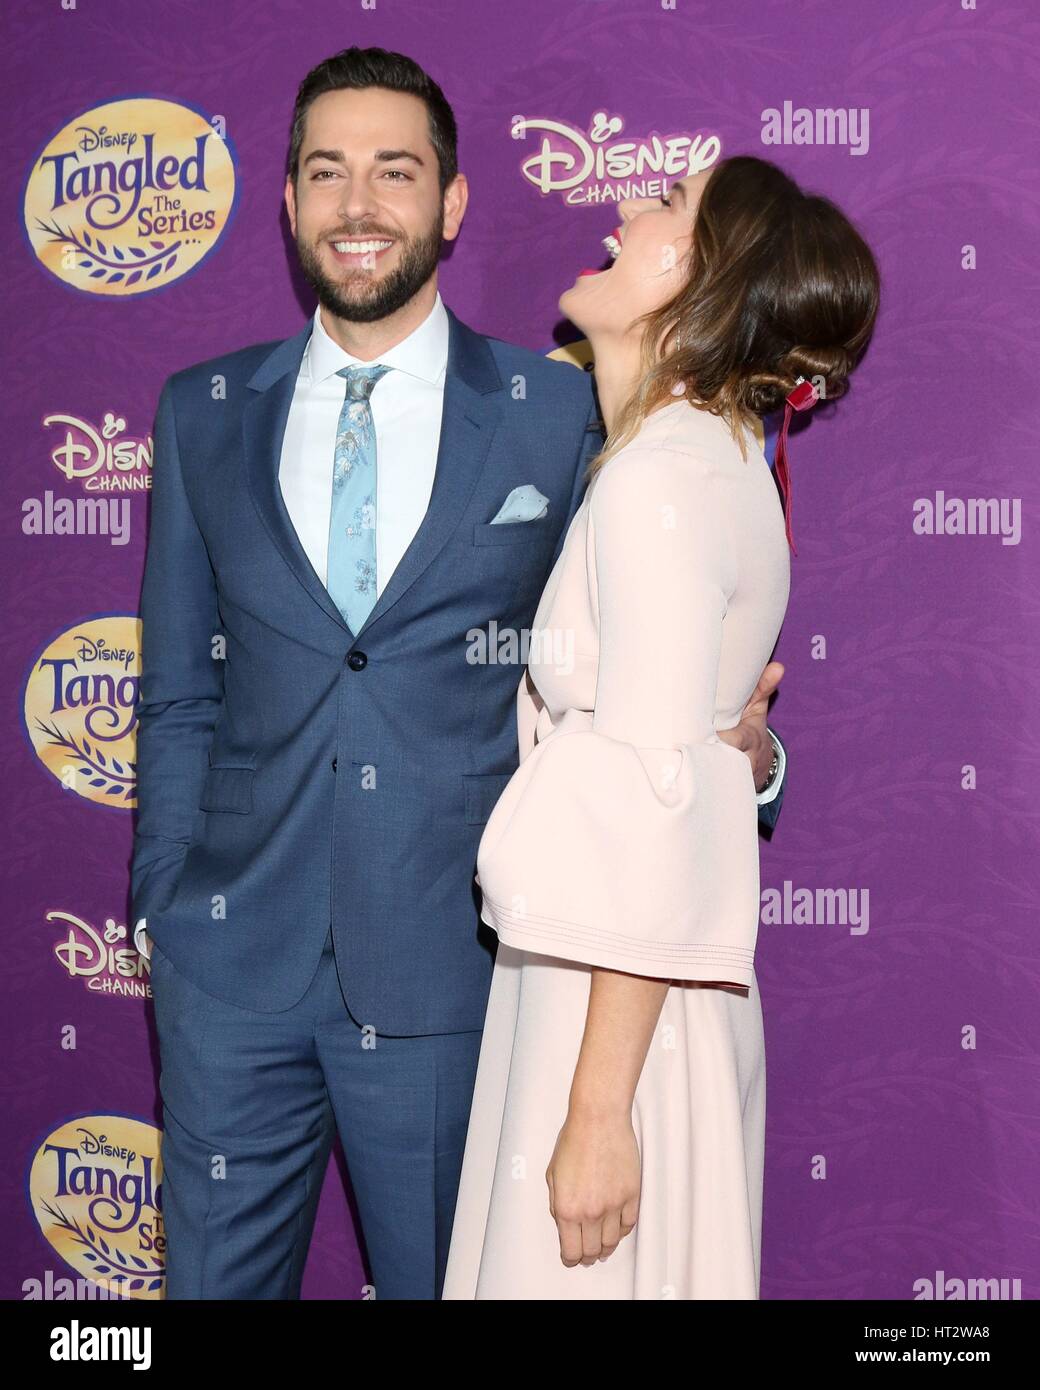 Los Angeles, CA, USA. 4th Mar, 2017. Zachary Levi, Mandy Moore at arrivals for Disney's TANGLED EVER AFTER Screening, The Paley Center for Media, Los Angeles, CA March 4, 2017. Credit: